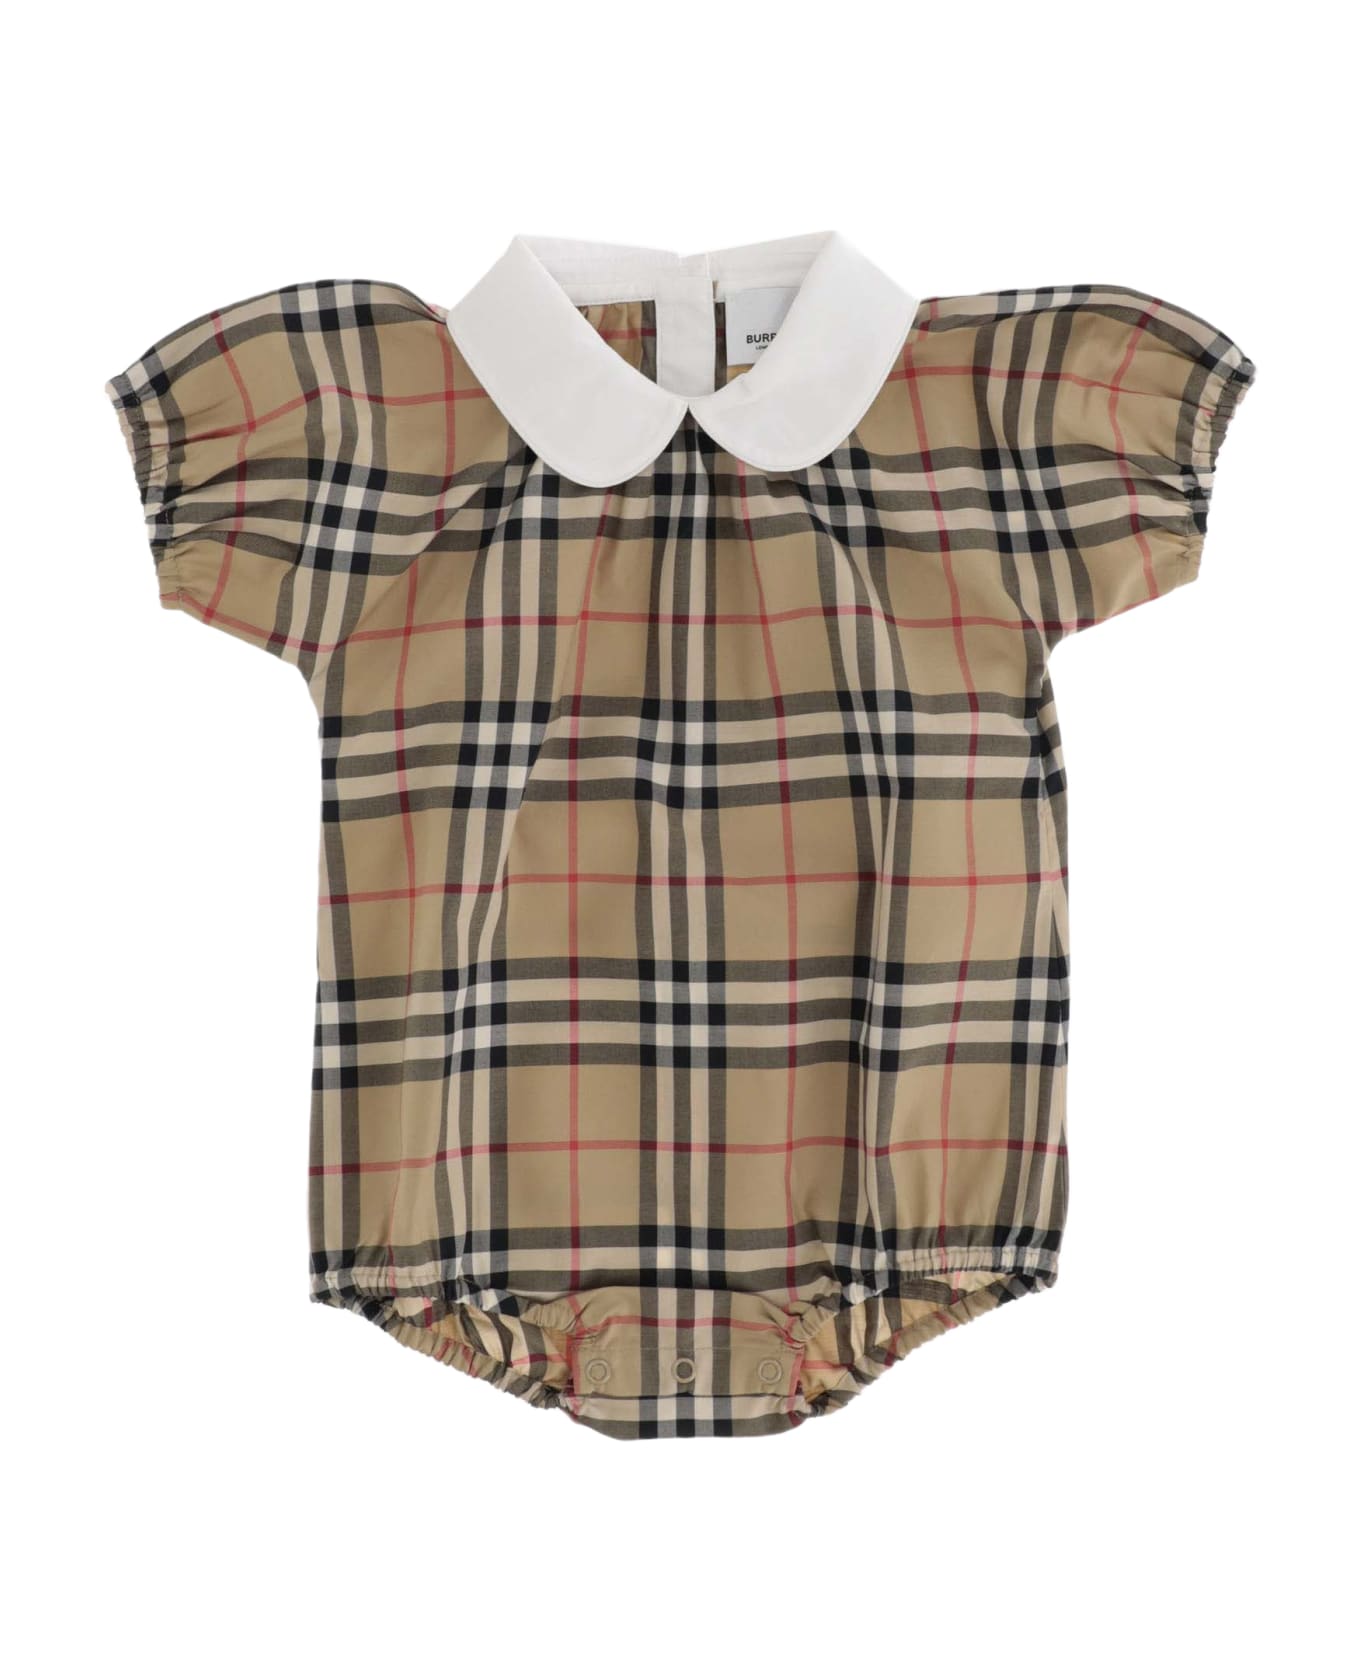 Burberry Stretch Cotton Bodysuit With Check Pattern - Red